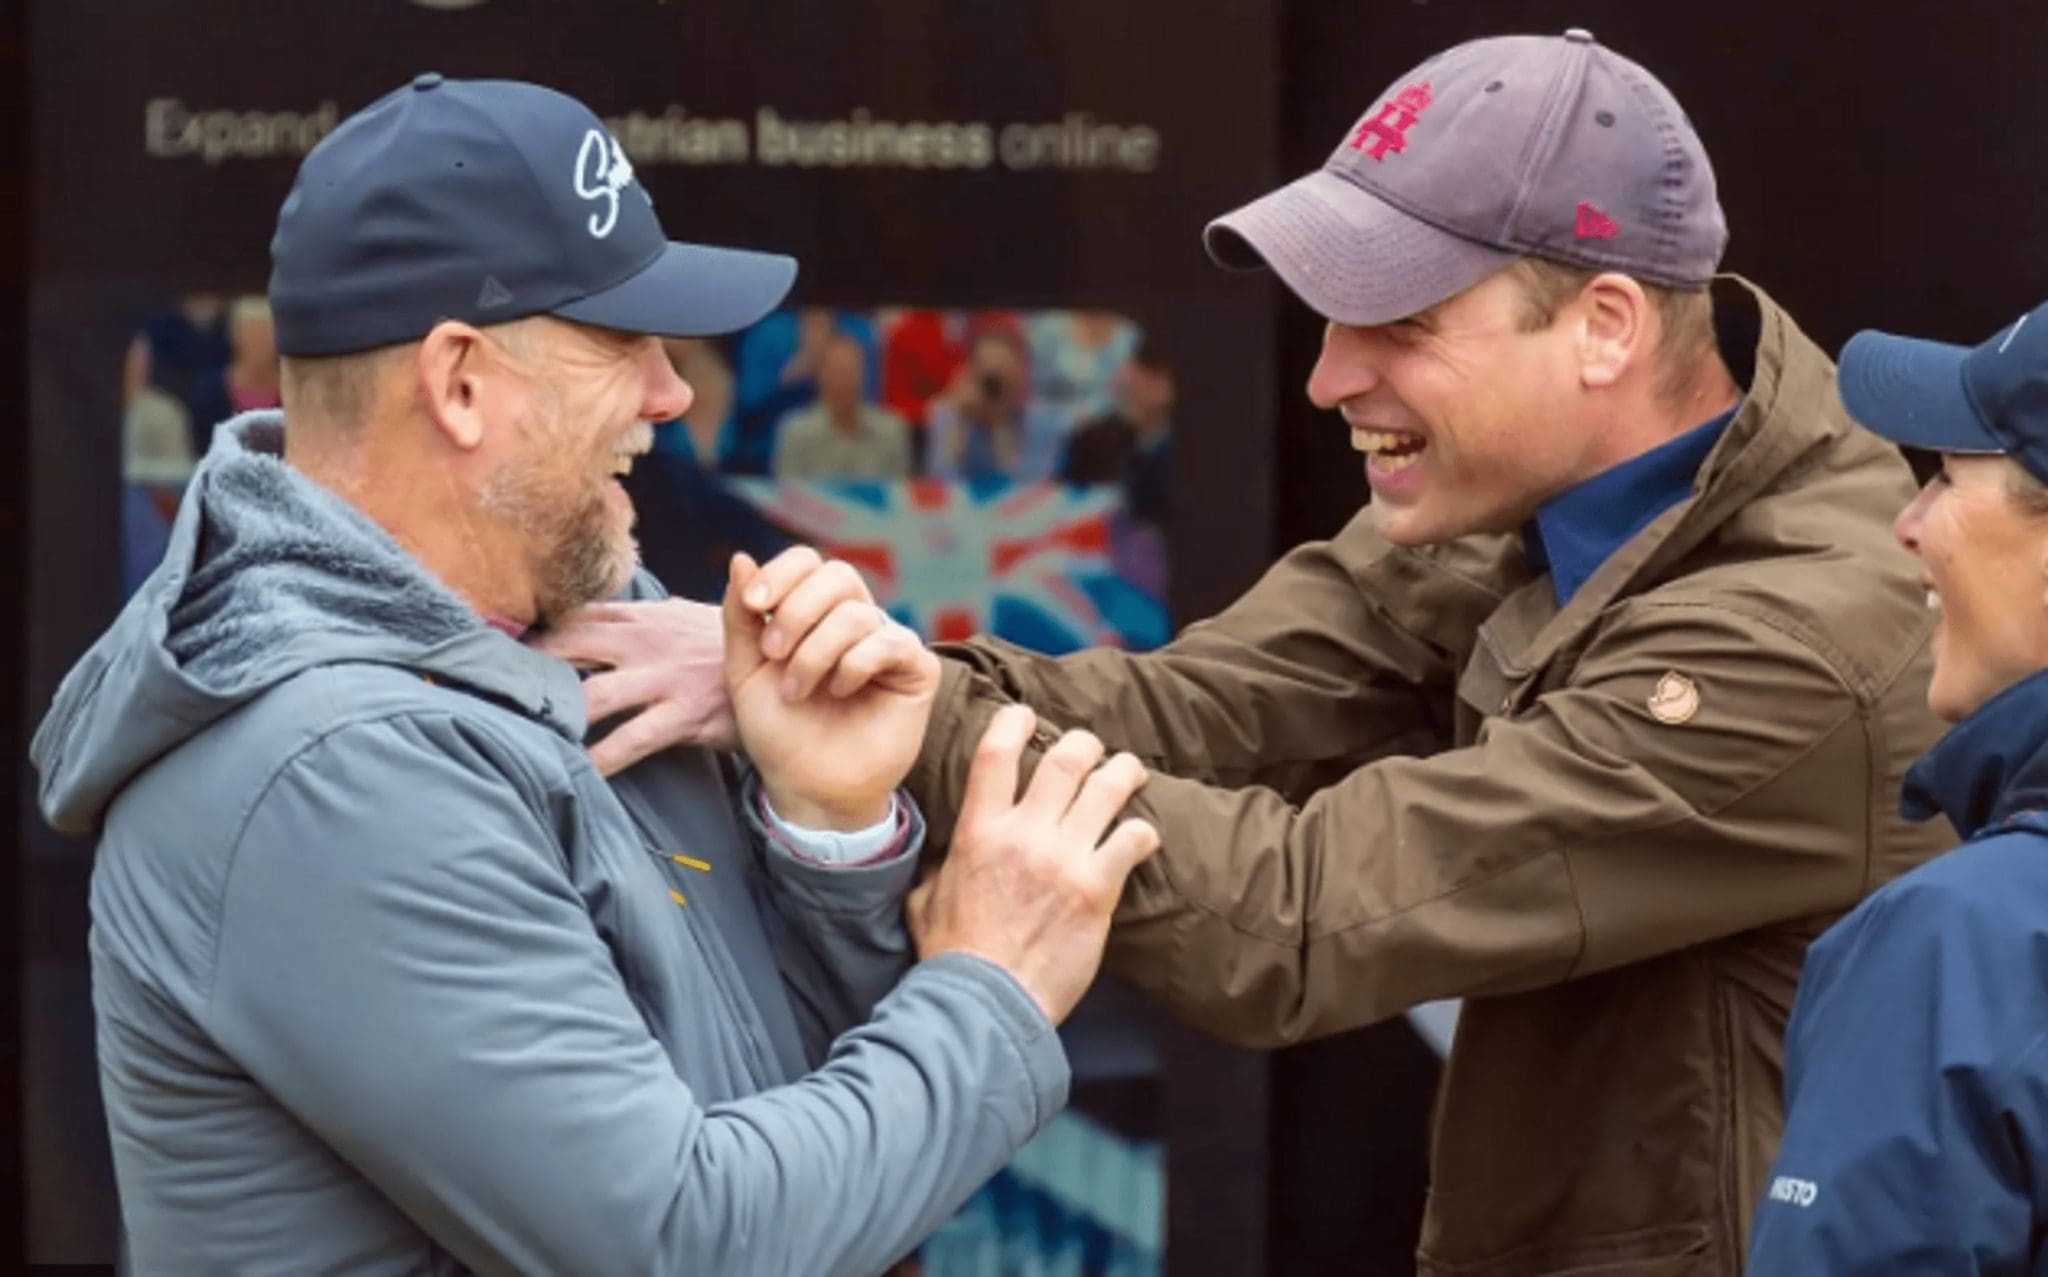 Prince William greeted the husband of the Queen's granddaughter, Mike Tindall, in a very touching way